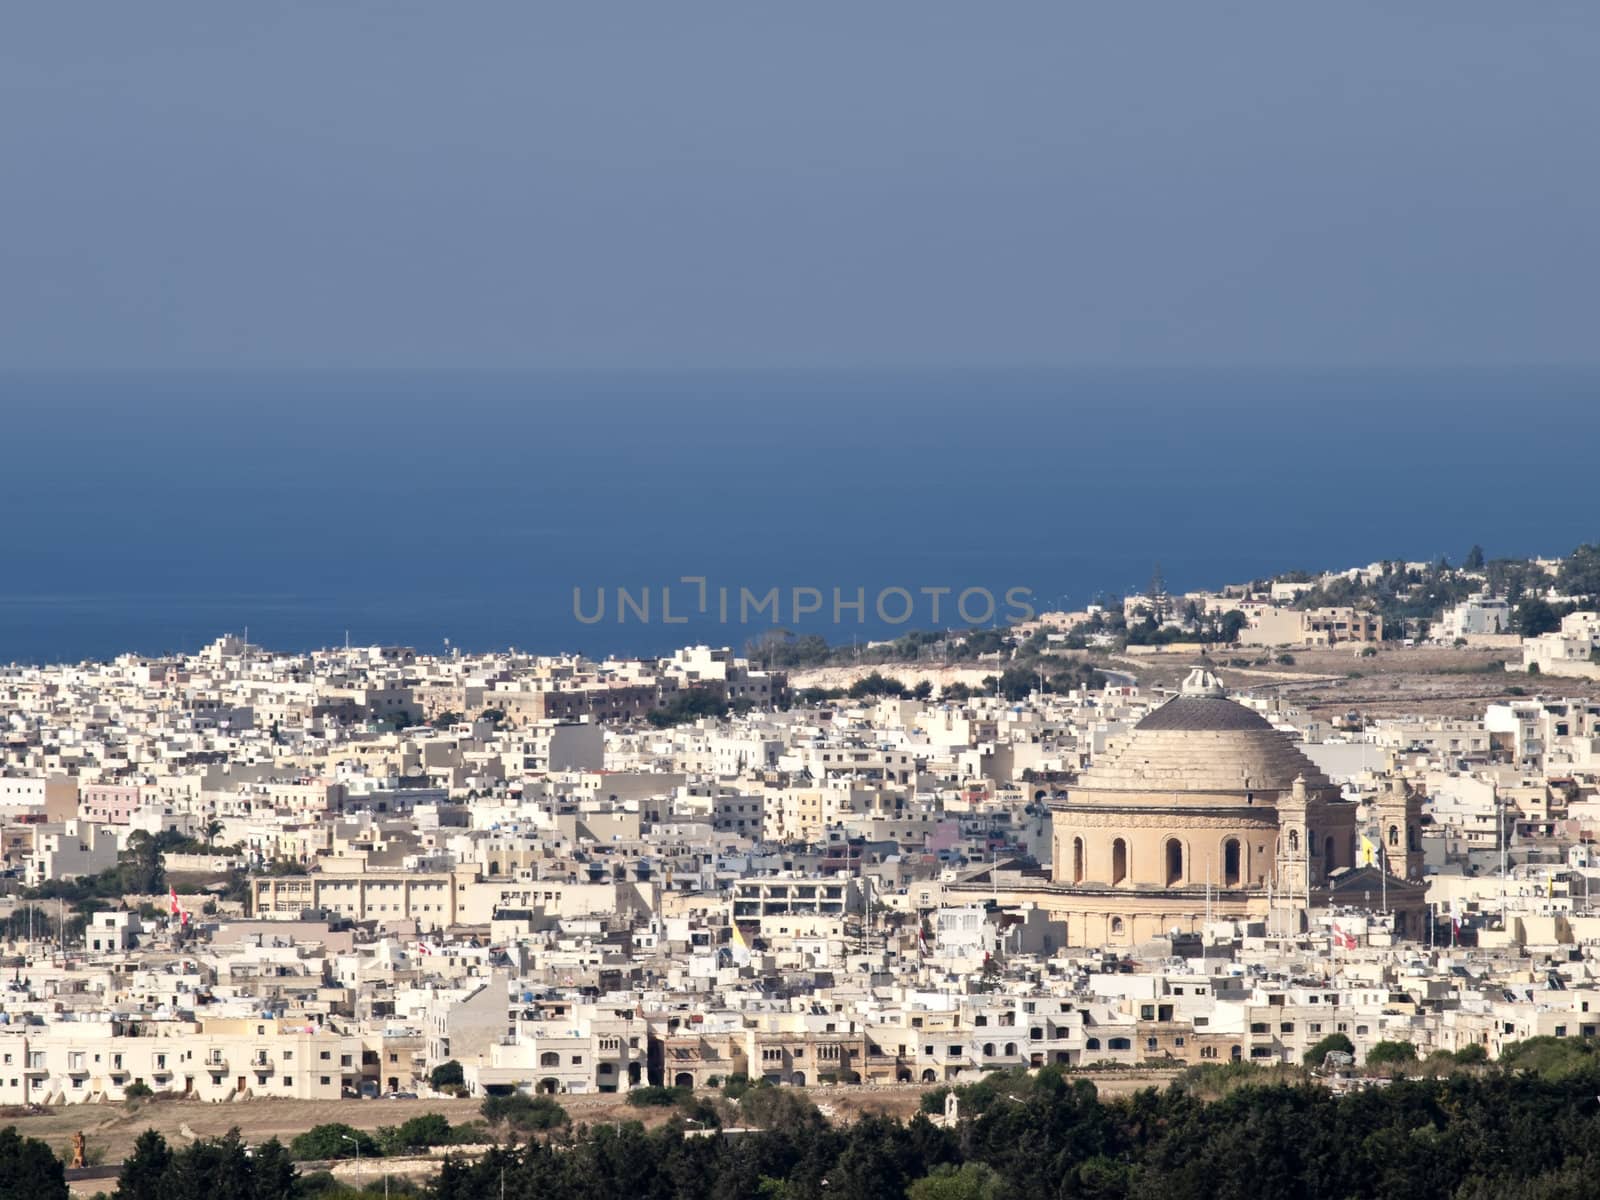 View of Mosta as seen from the bastions of the old city of Mdina